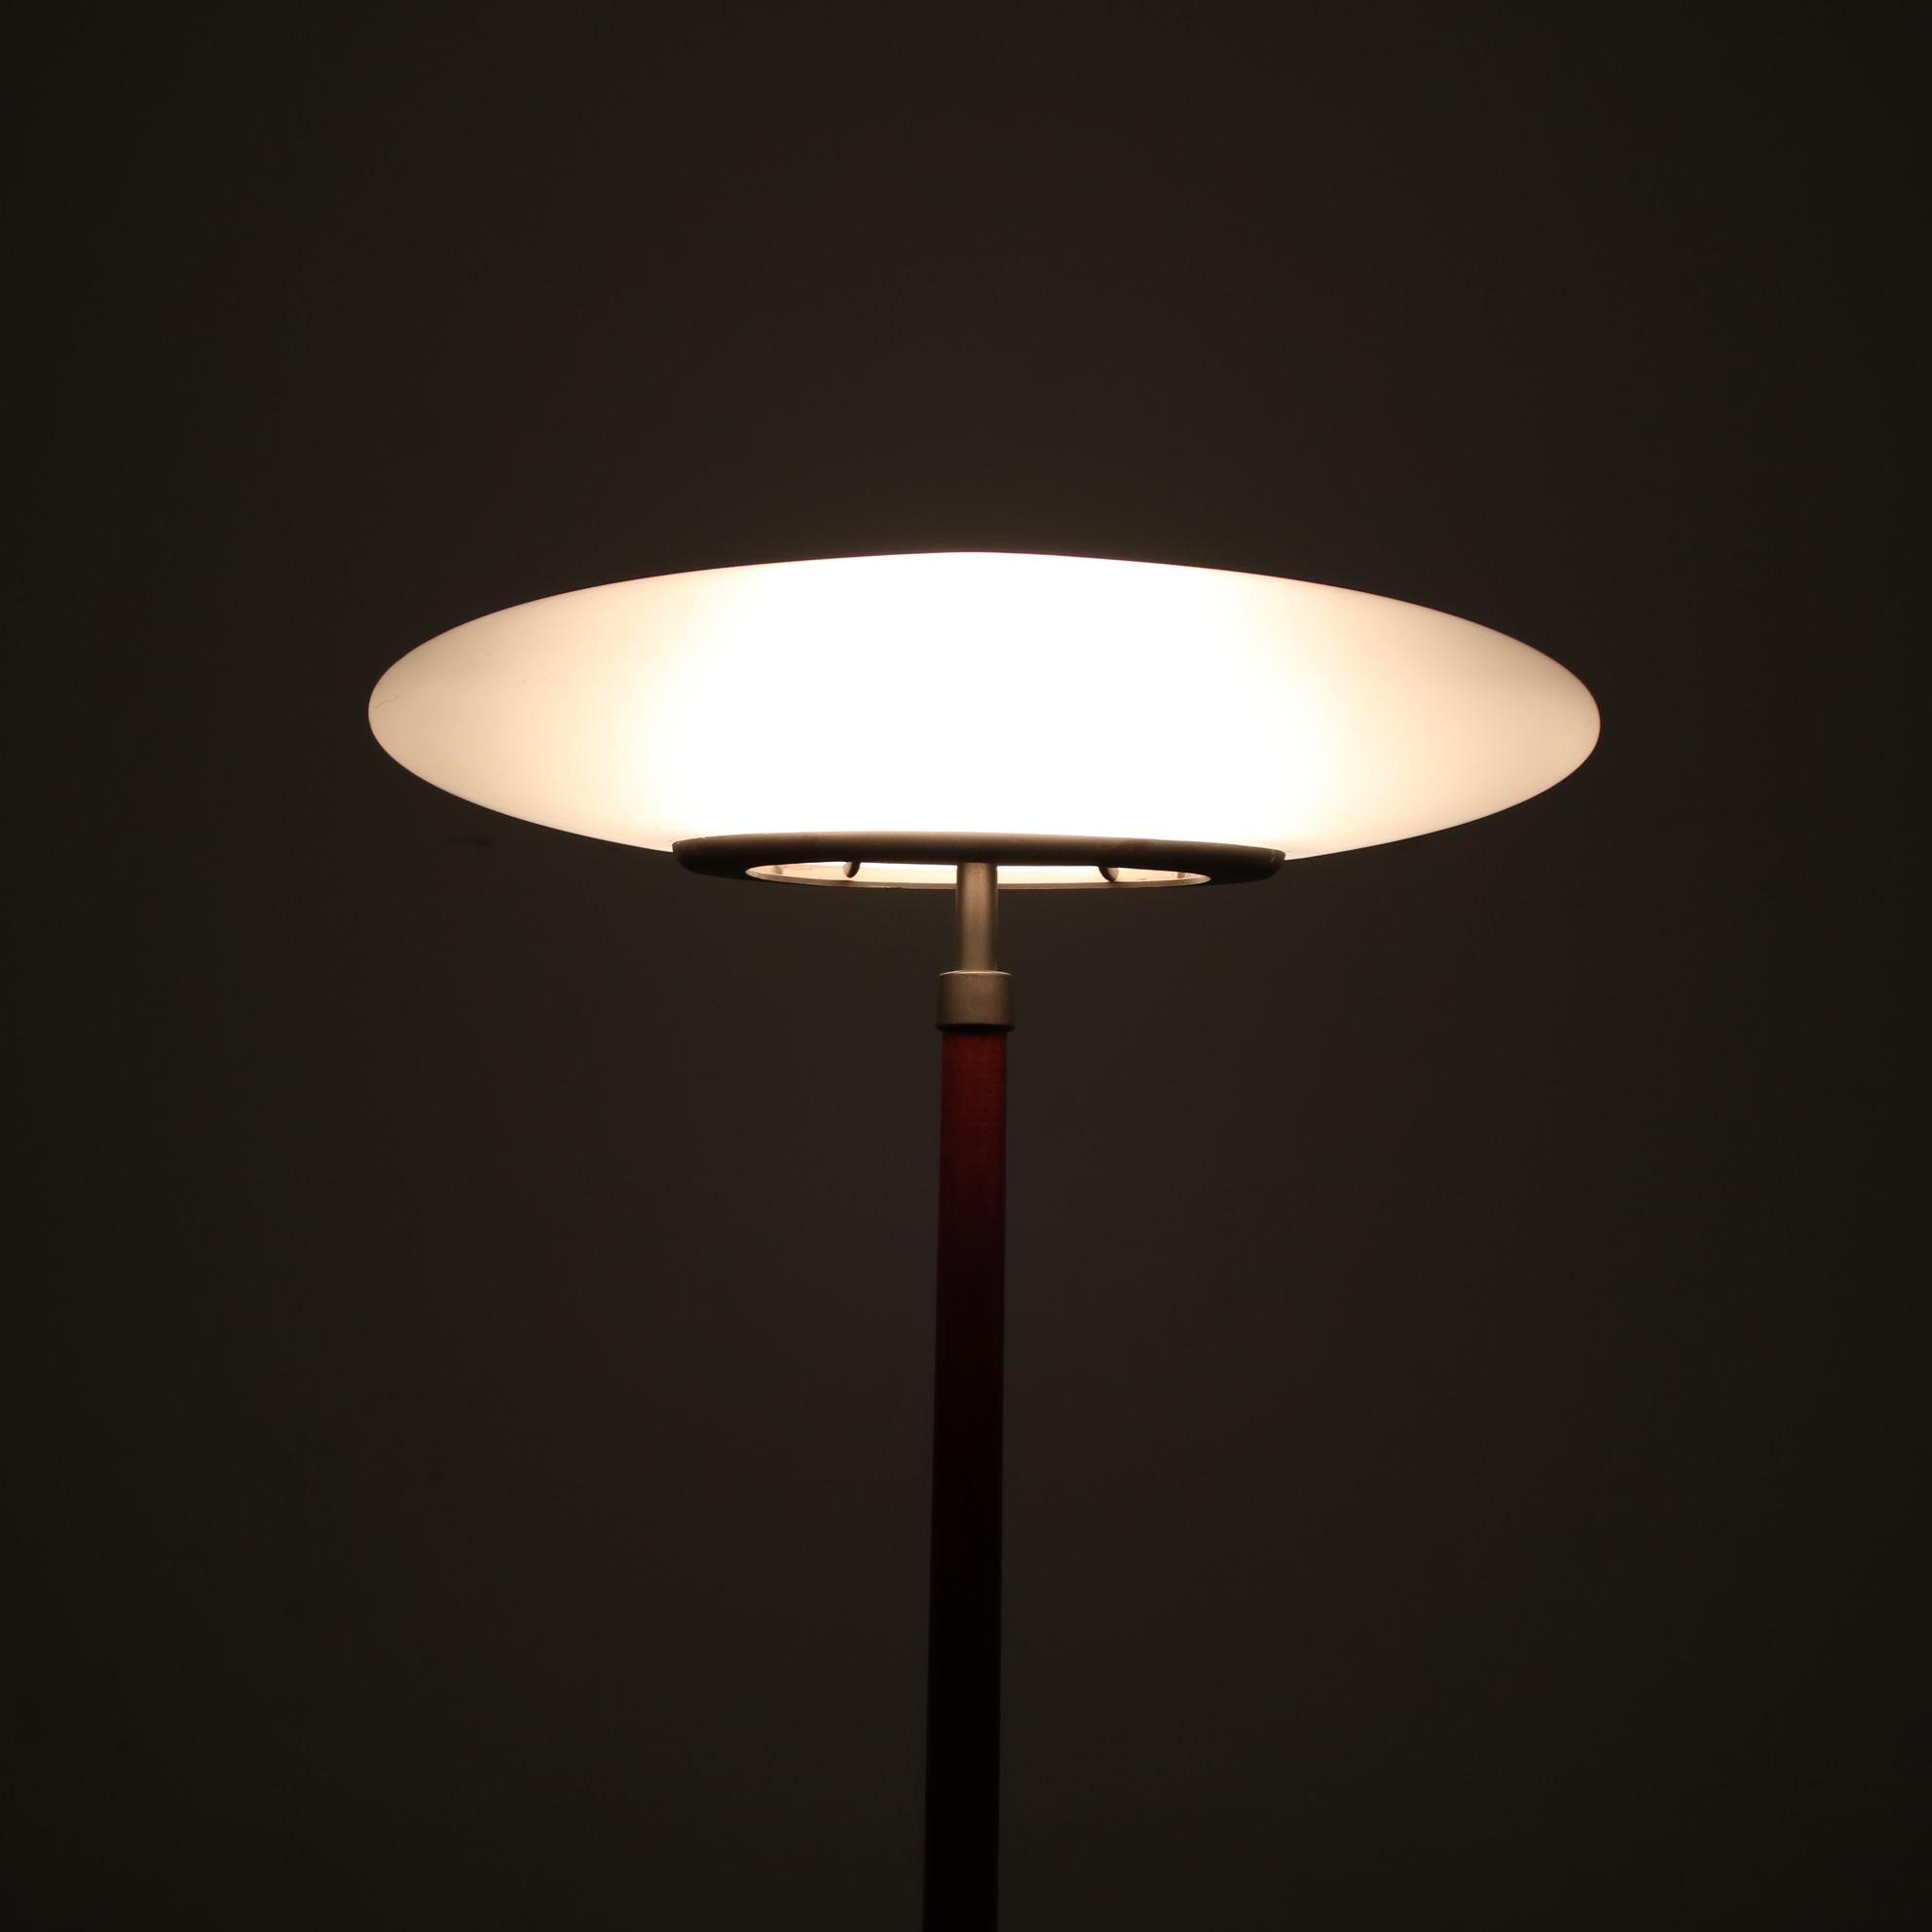 PAO Floor Lamp by Matteo Thun for Arteluce, Italy 1990 For Sale 2